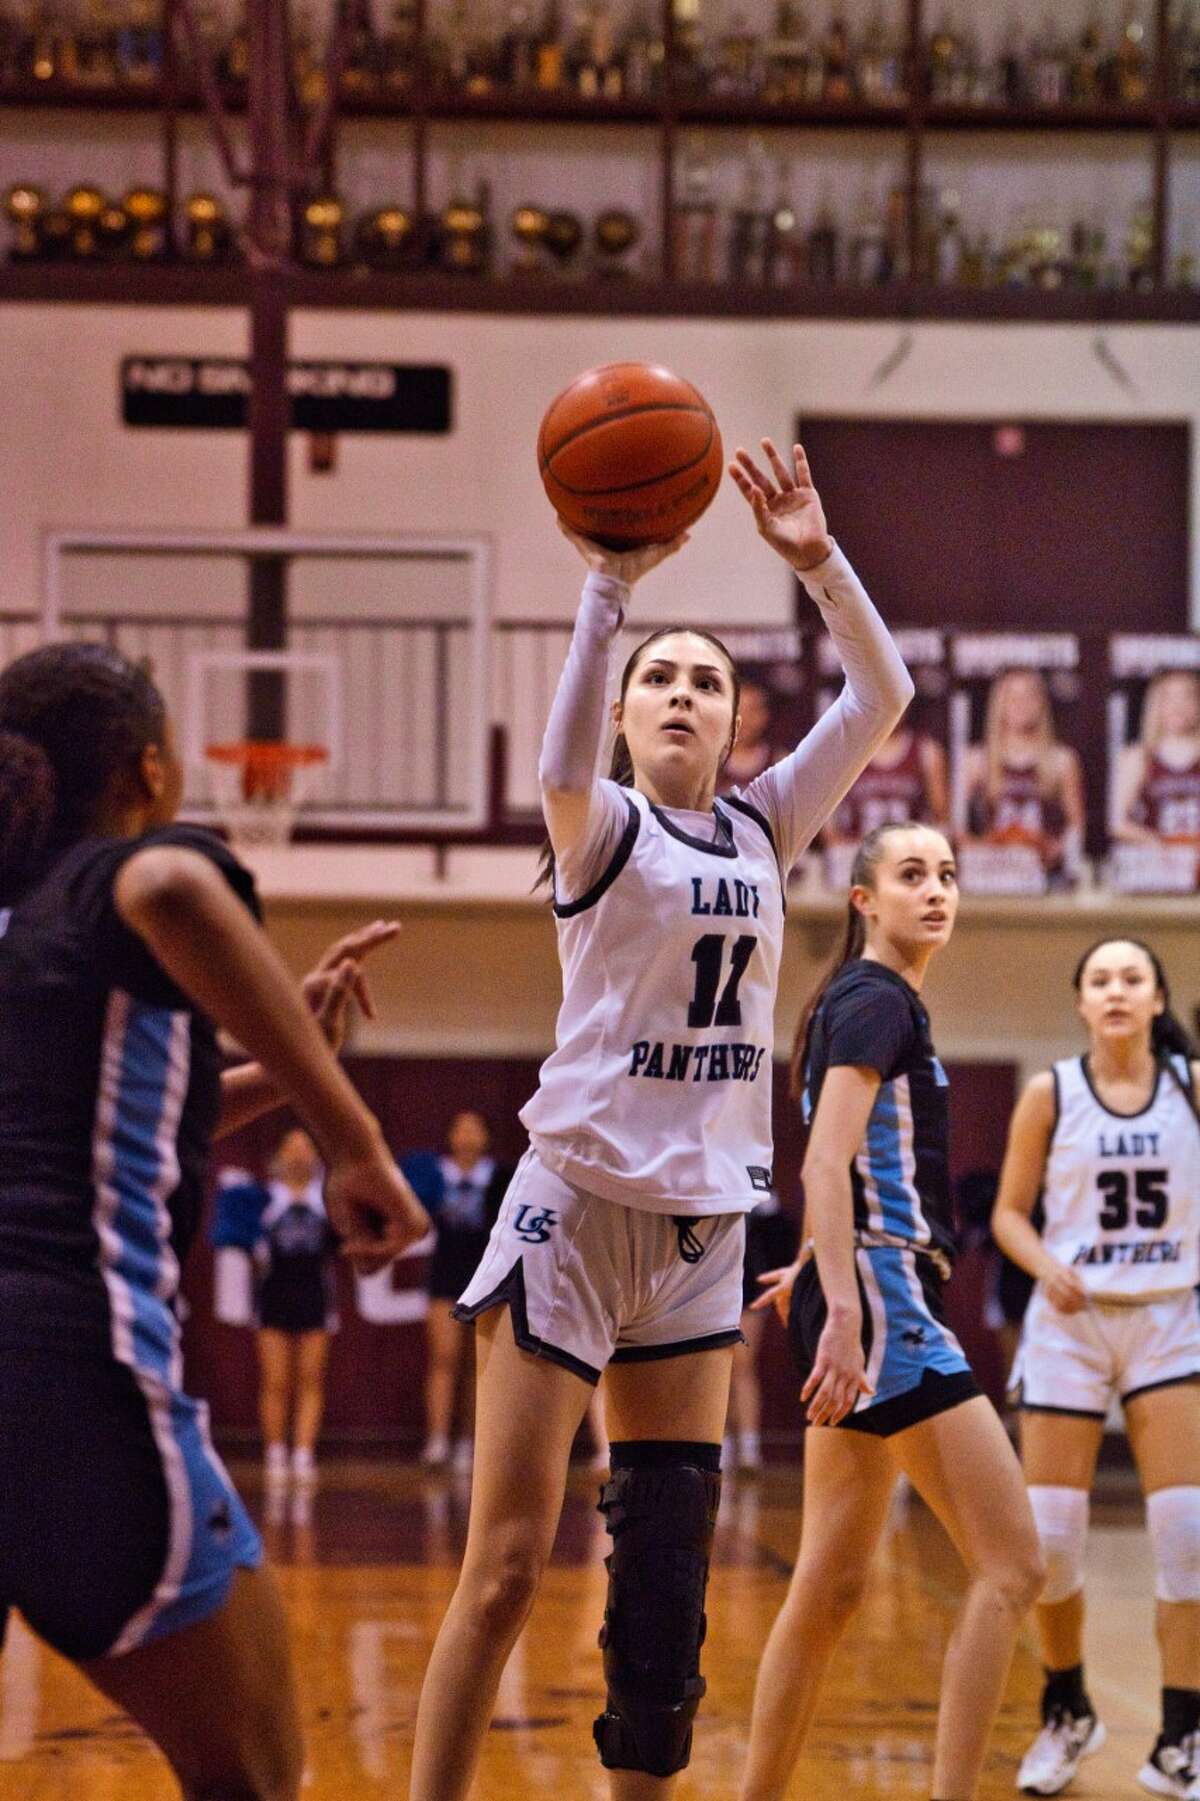 Bridgette Tello and United South face San Antonio Clark on Friday at 5:30 p.m. at the Northside Sports Gym in San Antonio in the regional semifinals.